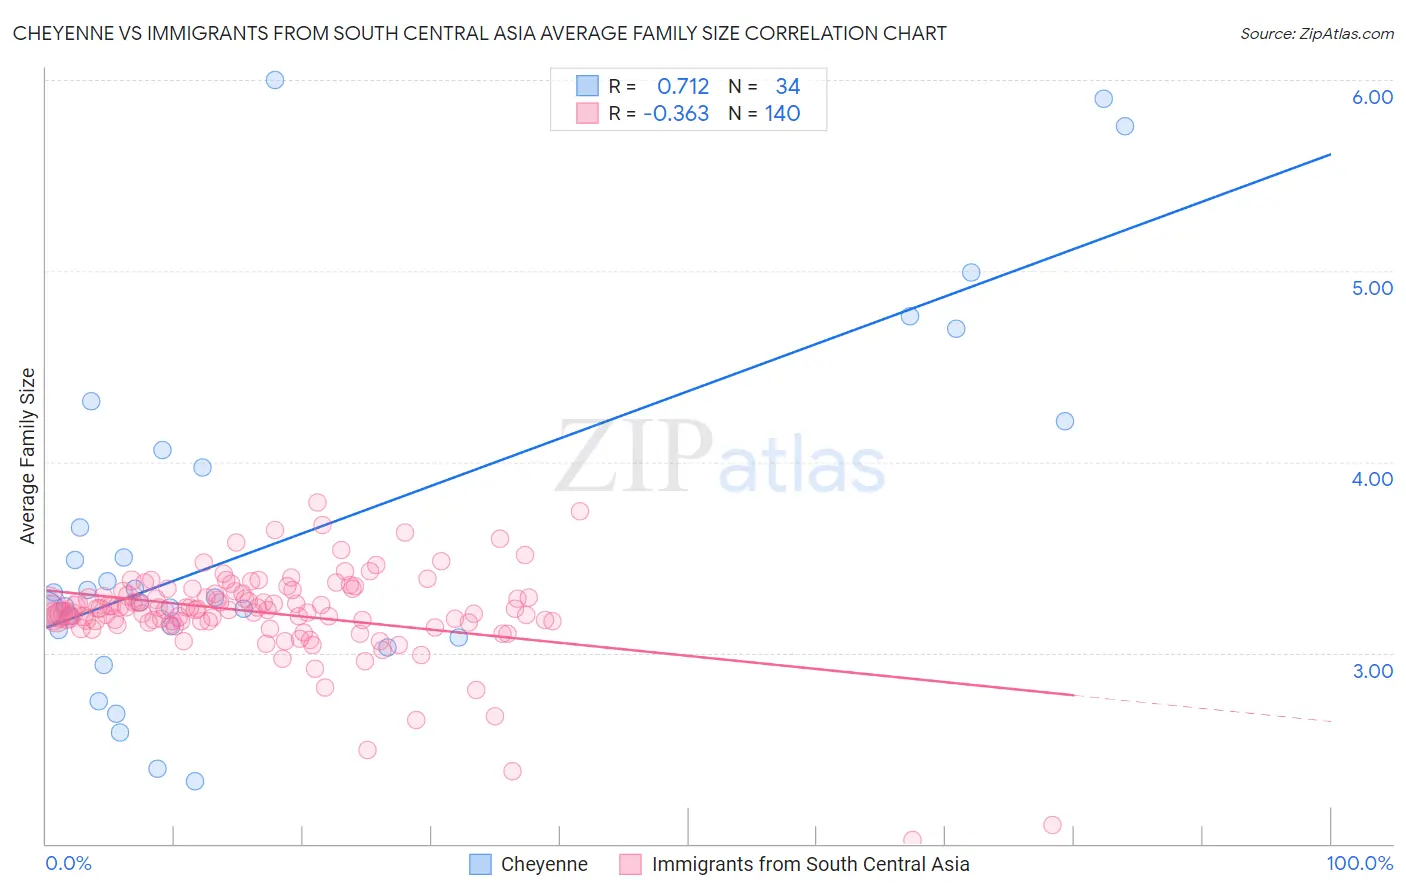 Cheyenne vs Immigrants from South Central Asia Average Family Size